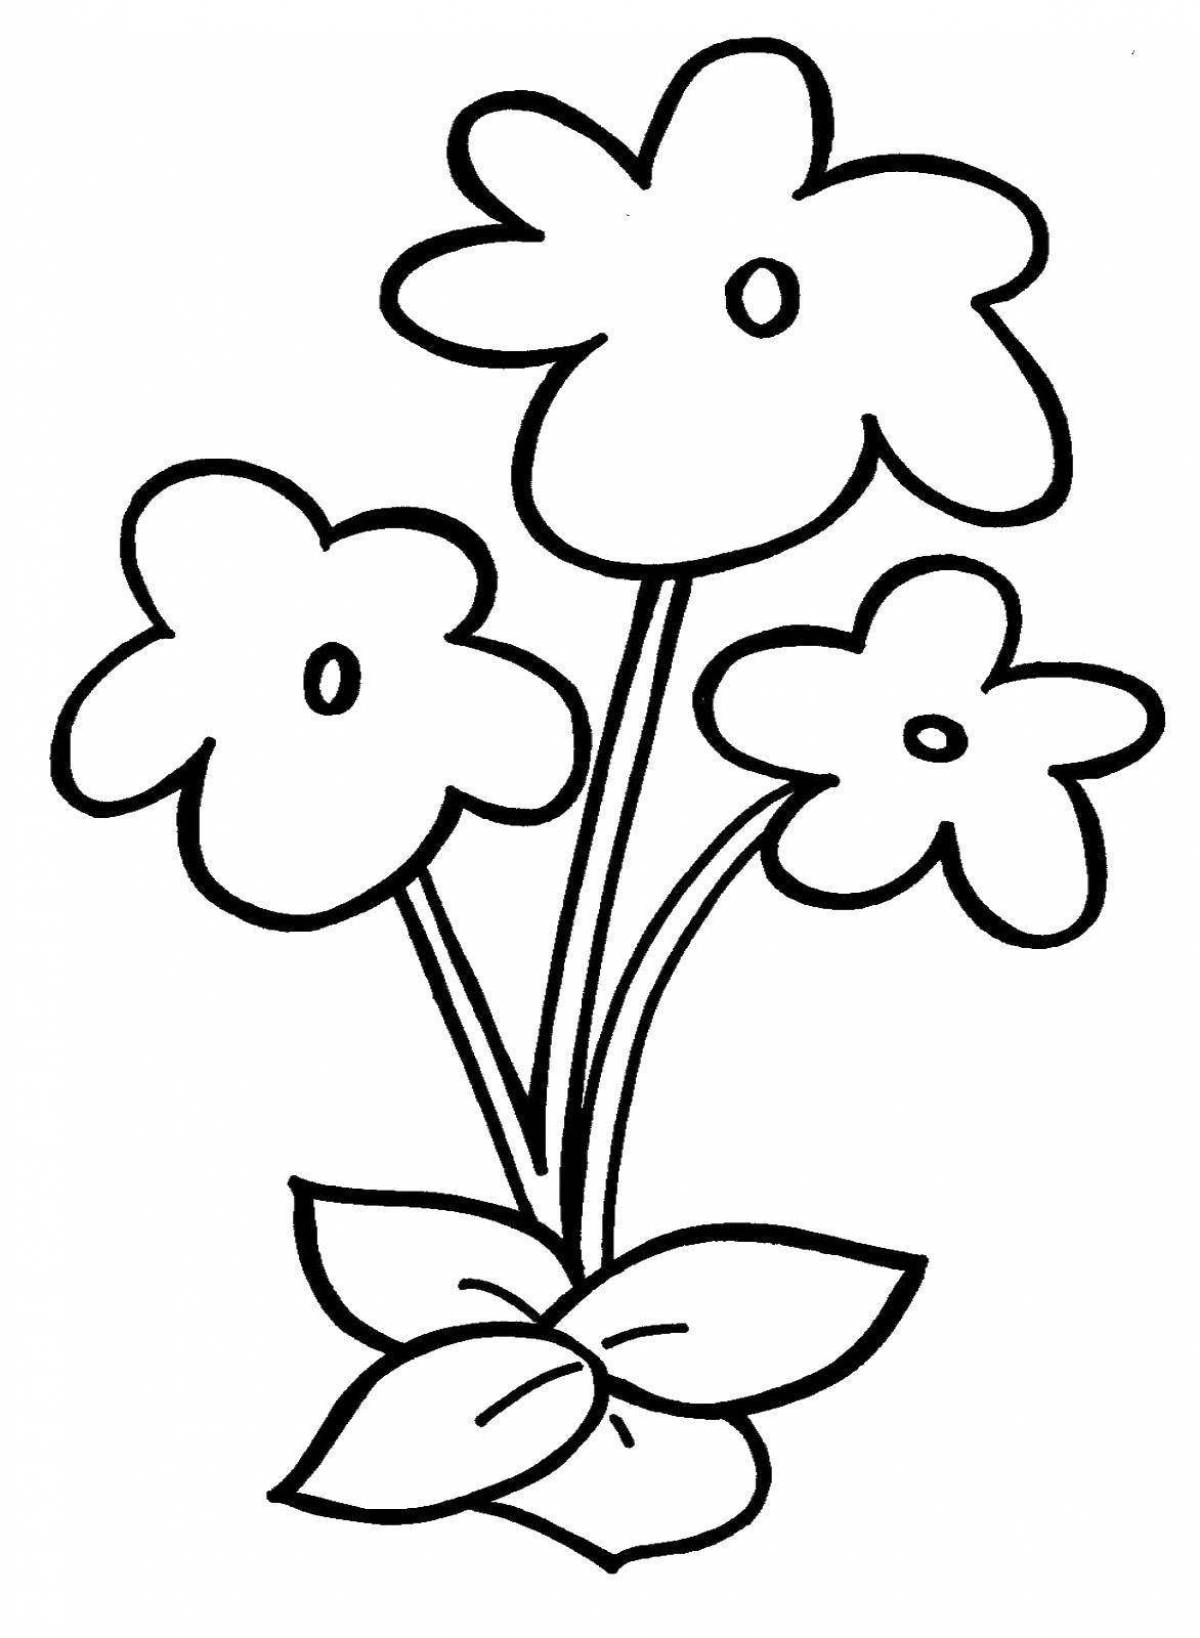 Fancy coloring flowers for children 6-7 years old